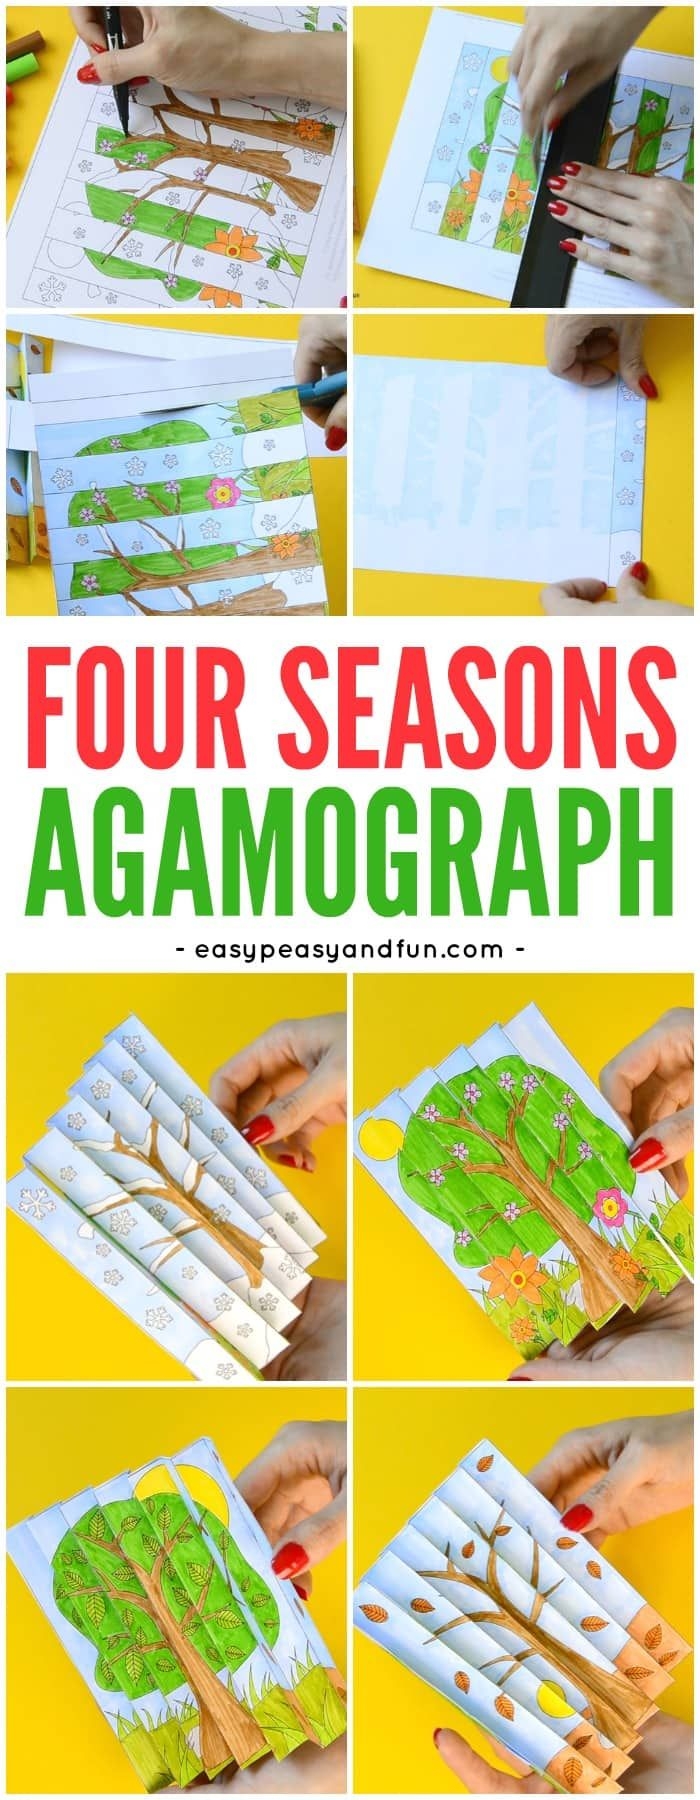 four seasons agamograph template easy peasy and fun